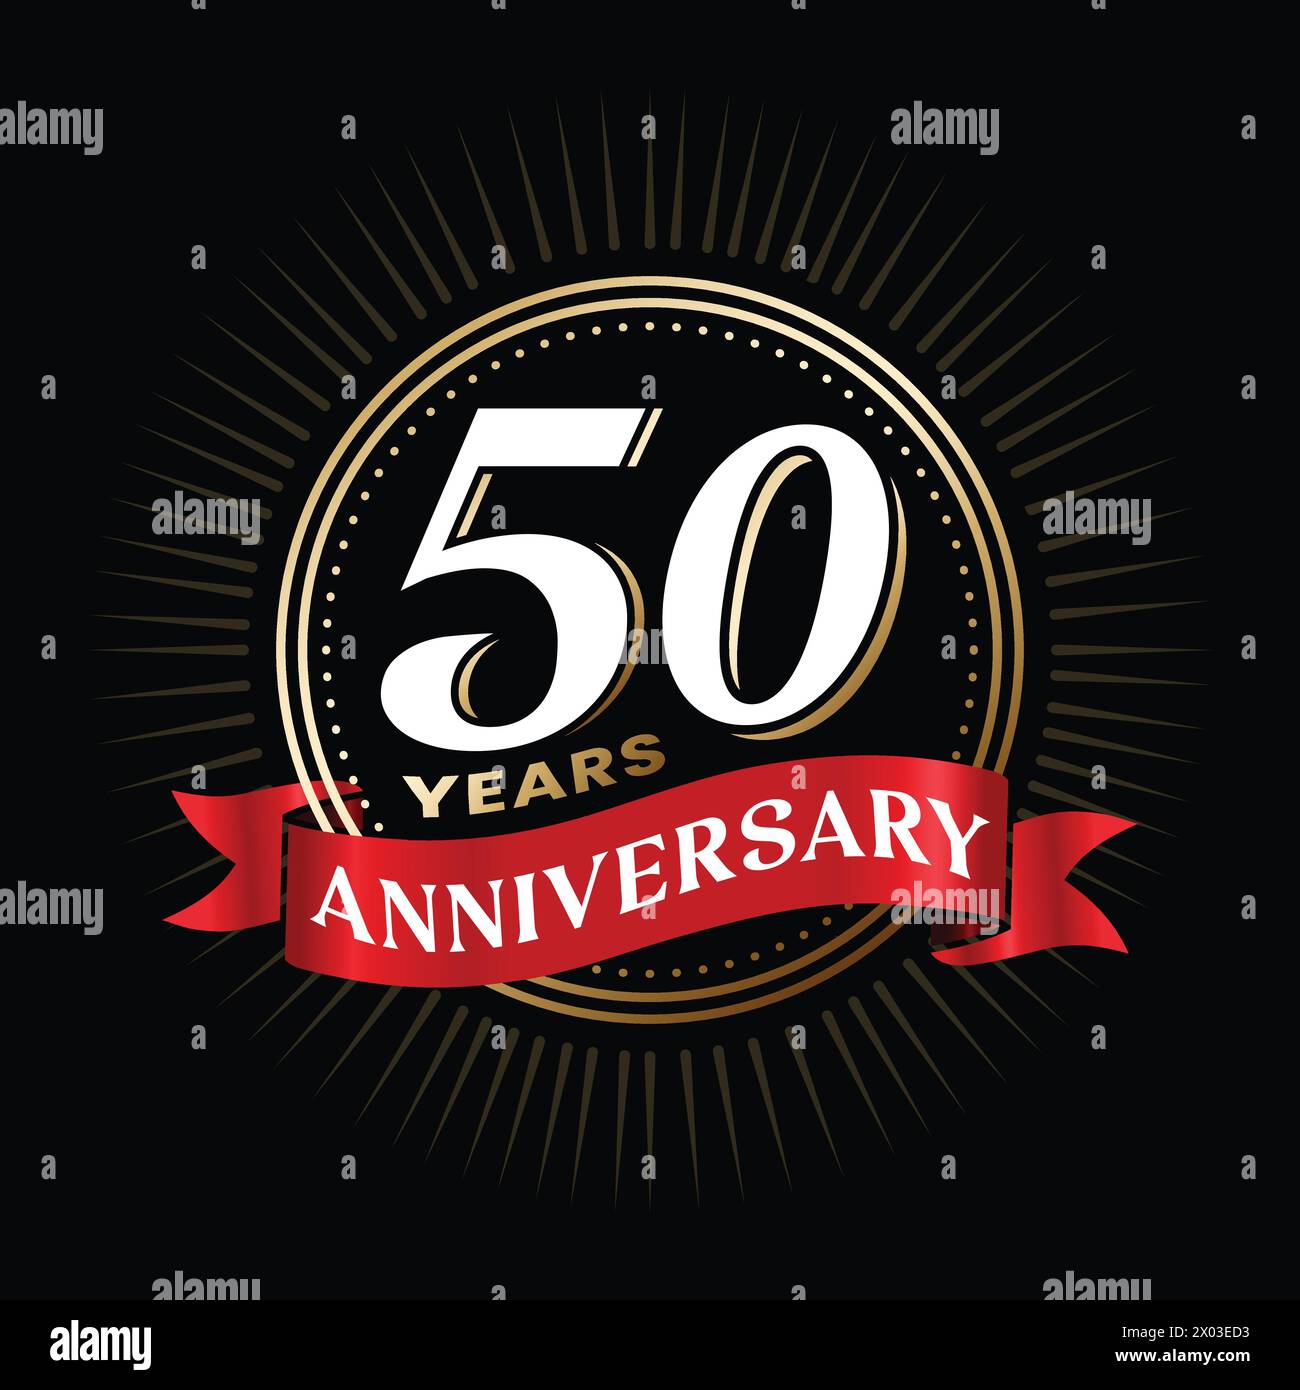 50 years anniversary logo design with ribbon and celebration elements. Company 50 year anniversary badge. 50 TH birthday sign and symbol. Golden color Stock Vector